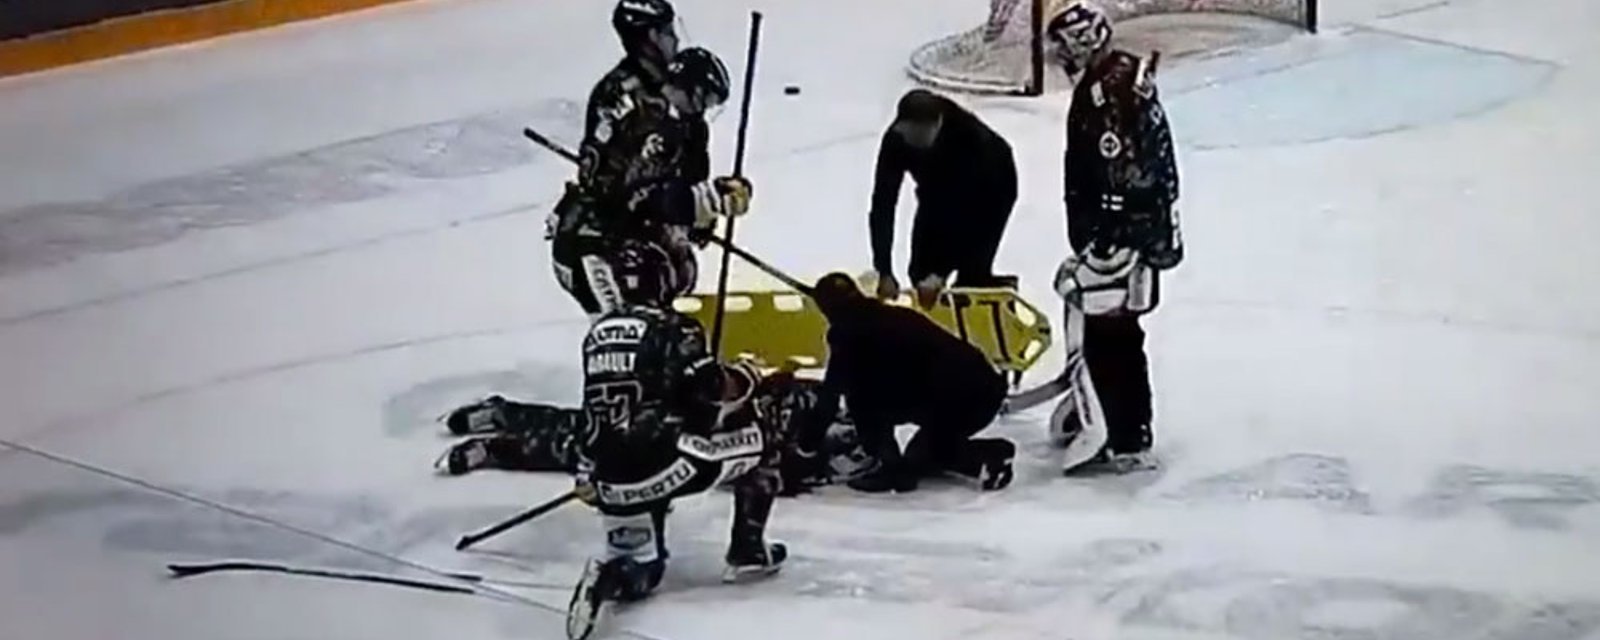 Canes top prospect Patrik Puistola stretchered off the ice after nasty hit! 